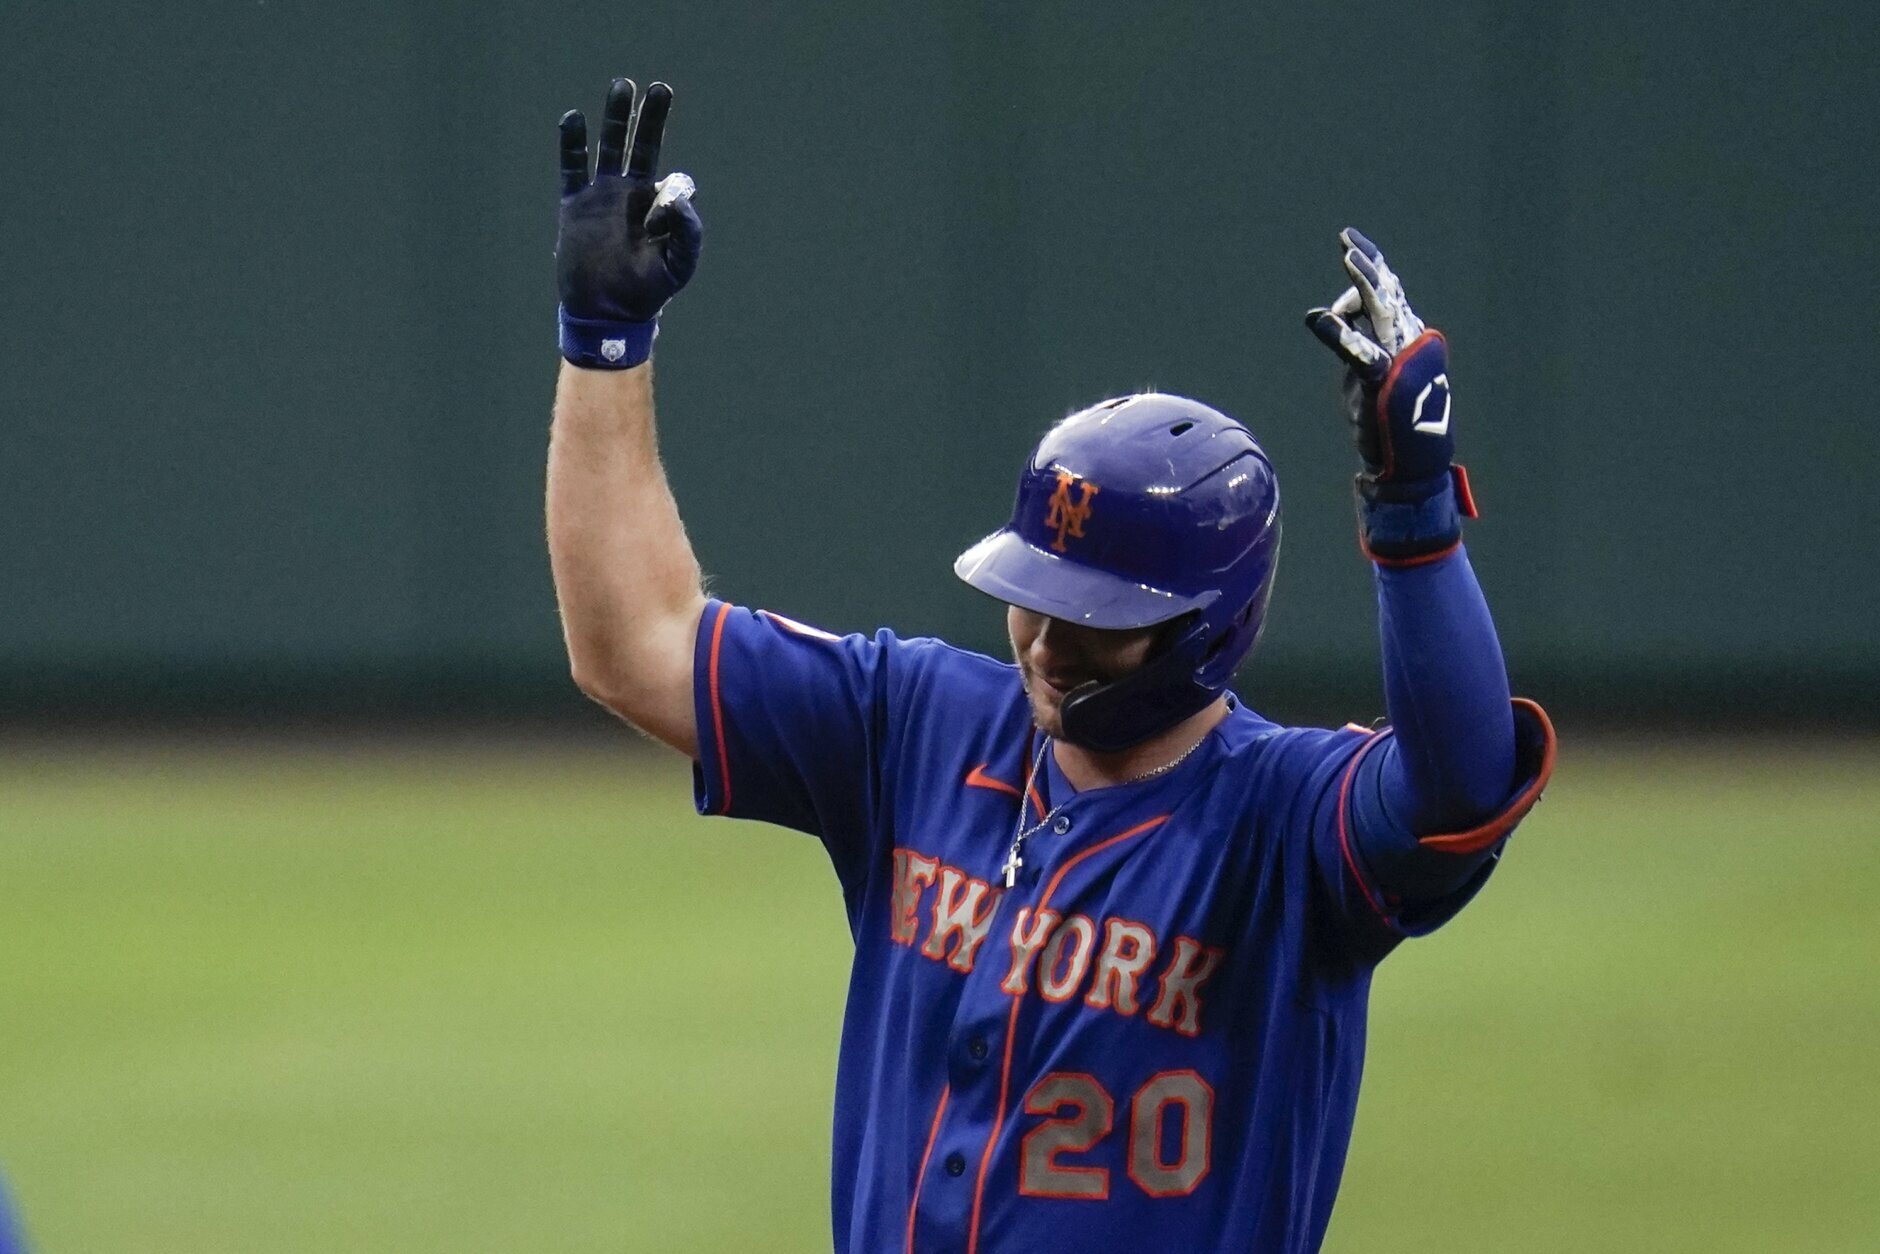 New York Mets' Pete Alonso gestures while running the bases after hitting a two-run home run off Baltimore Orioles starting pitcher Matt Harvey during the first inning of a baseball game, Wednesday, June 9, 2021, in Baltimore. Mets' Francisco Lindor scored on the home run. (AP Photo/Julio Cortez)